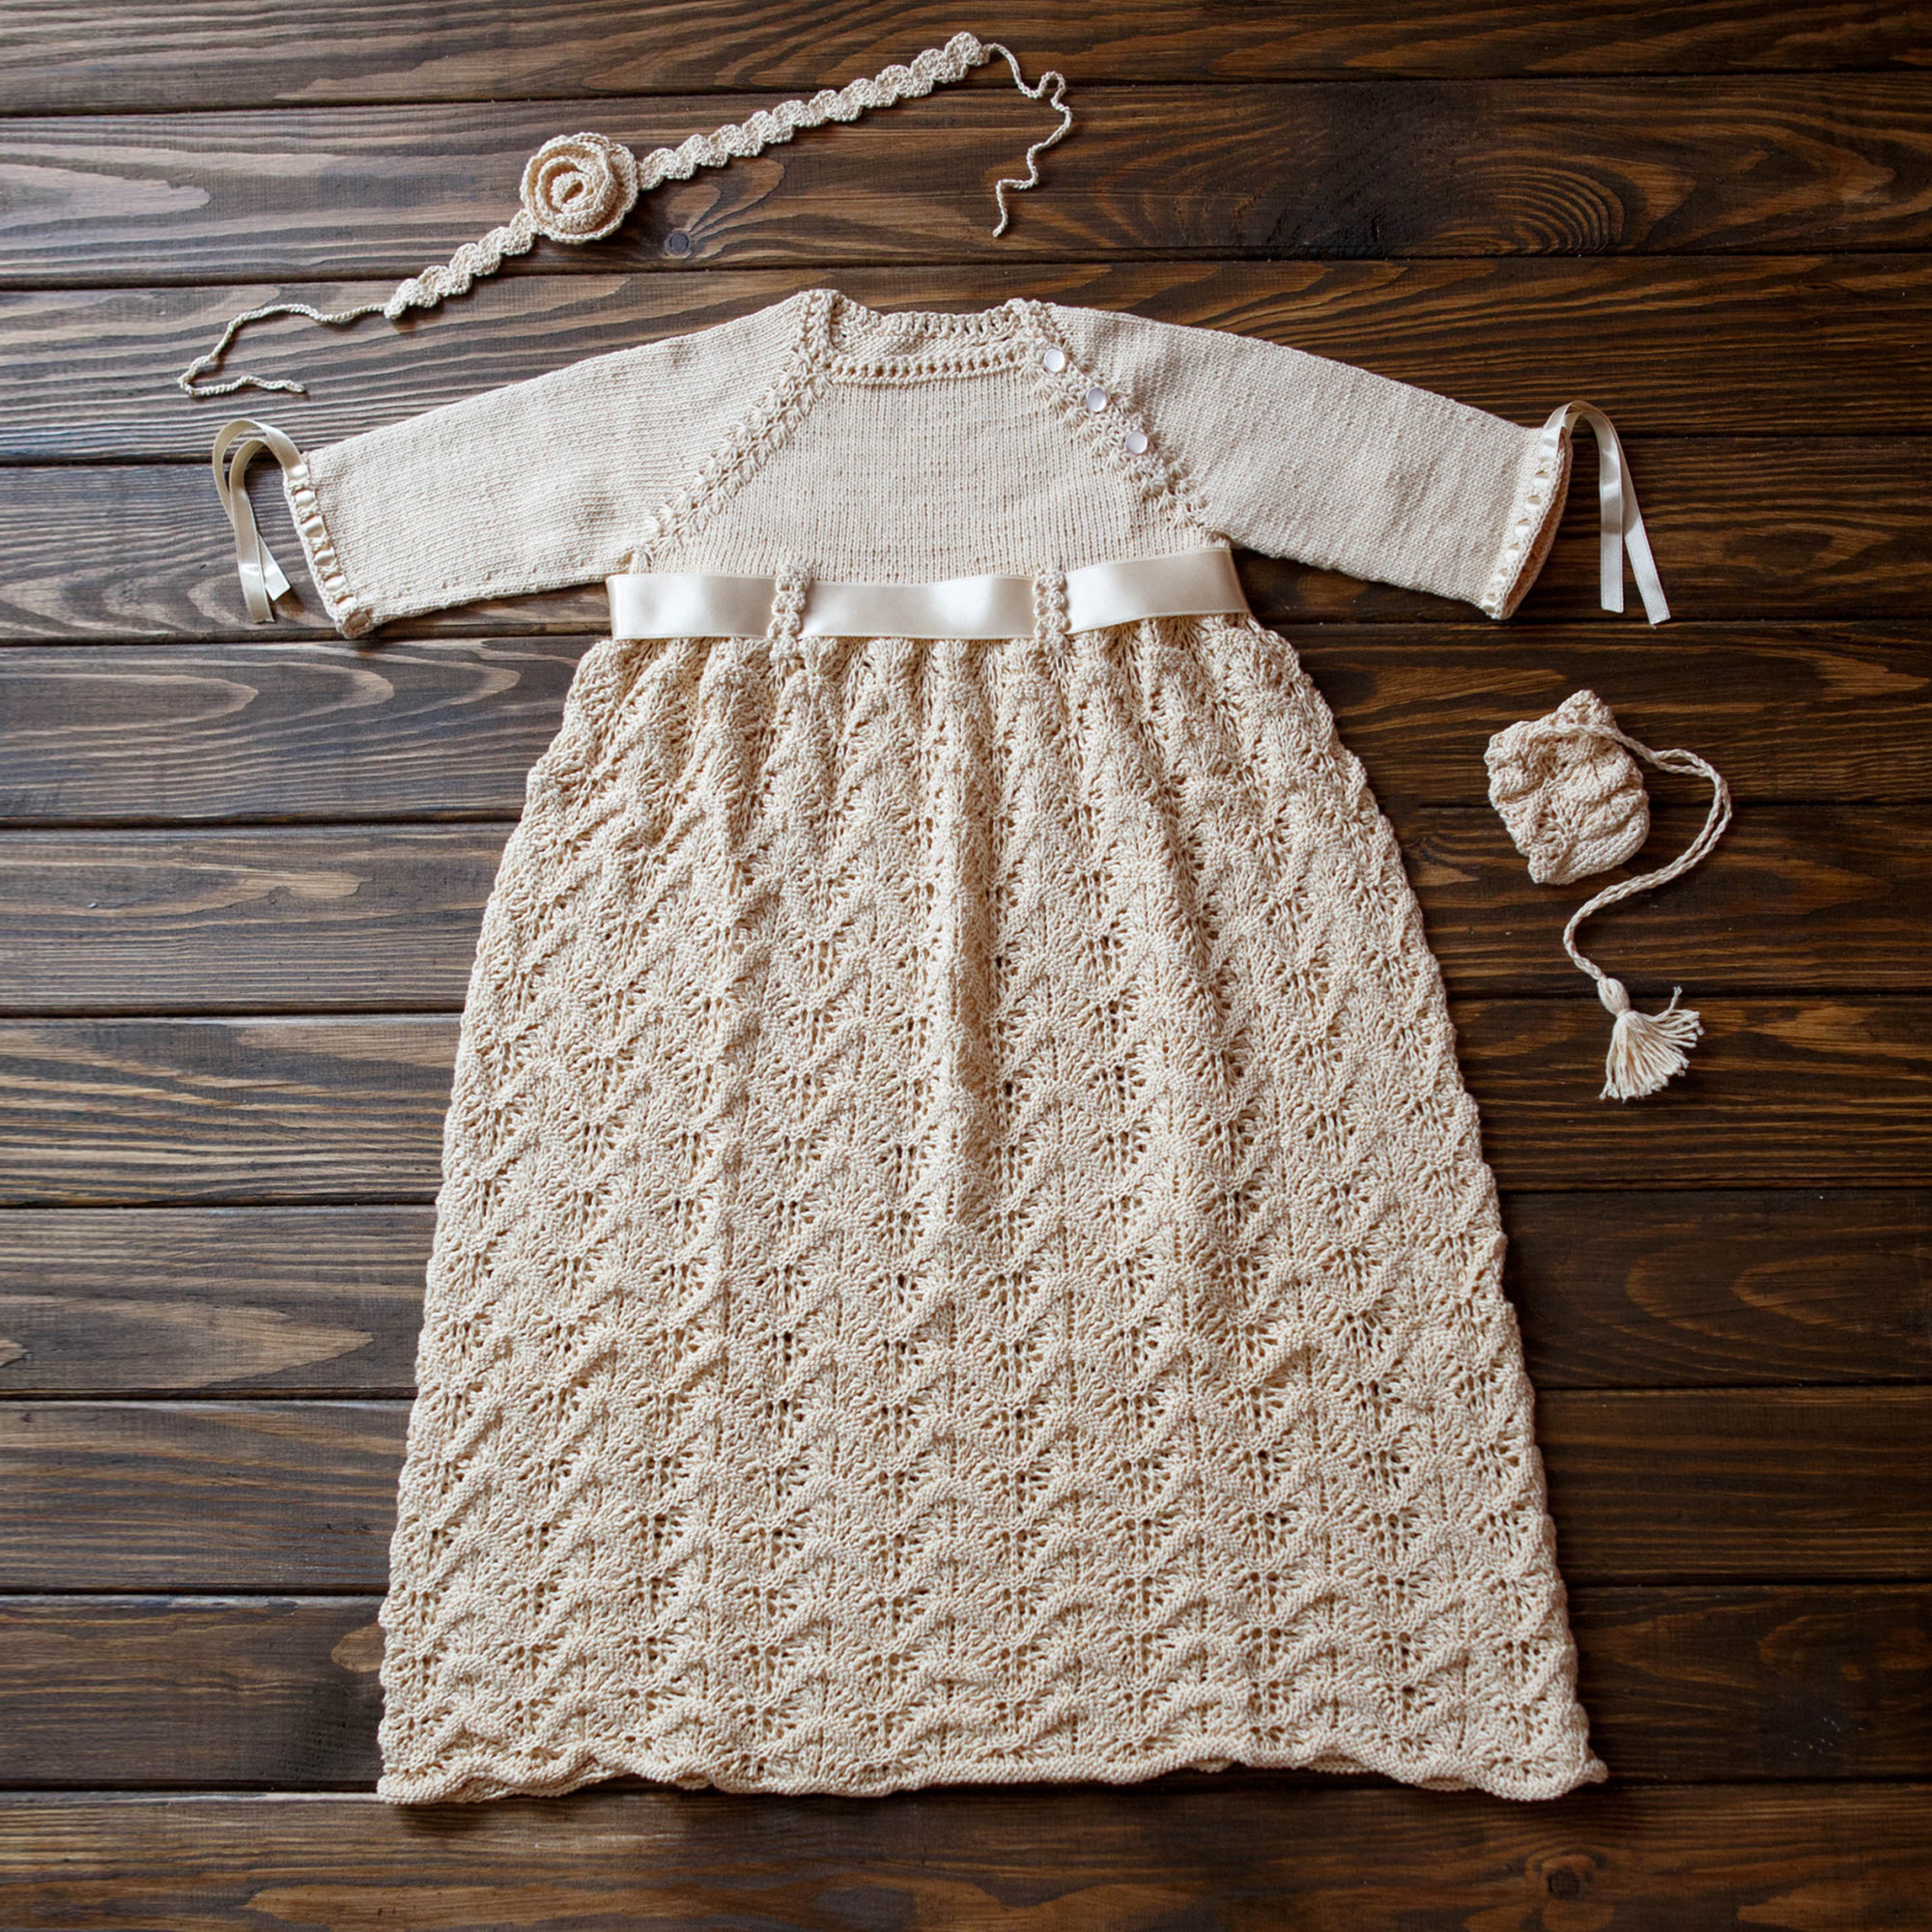 Hand Knitted Christening Set Outfit 12-18 months 80-86cm 2.6' -